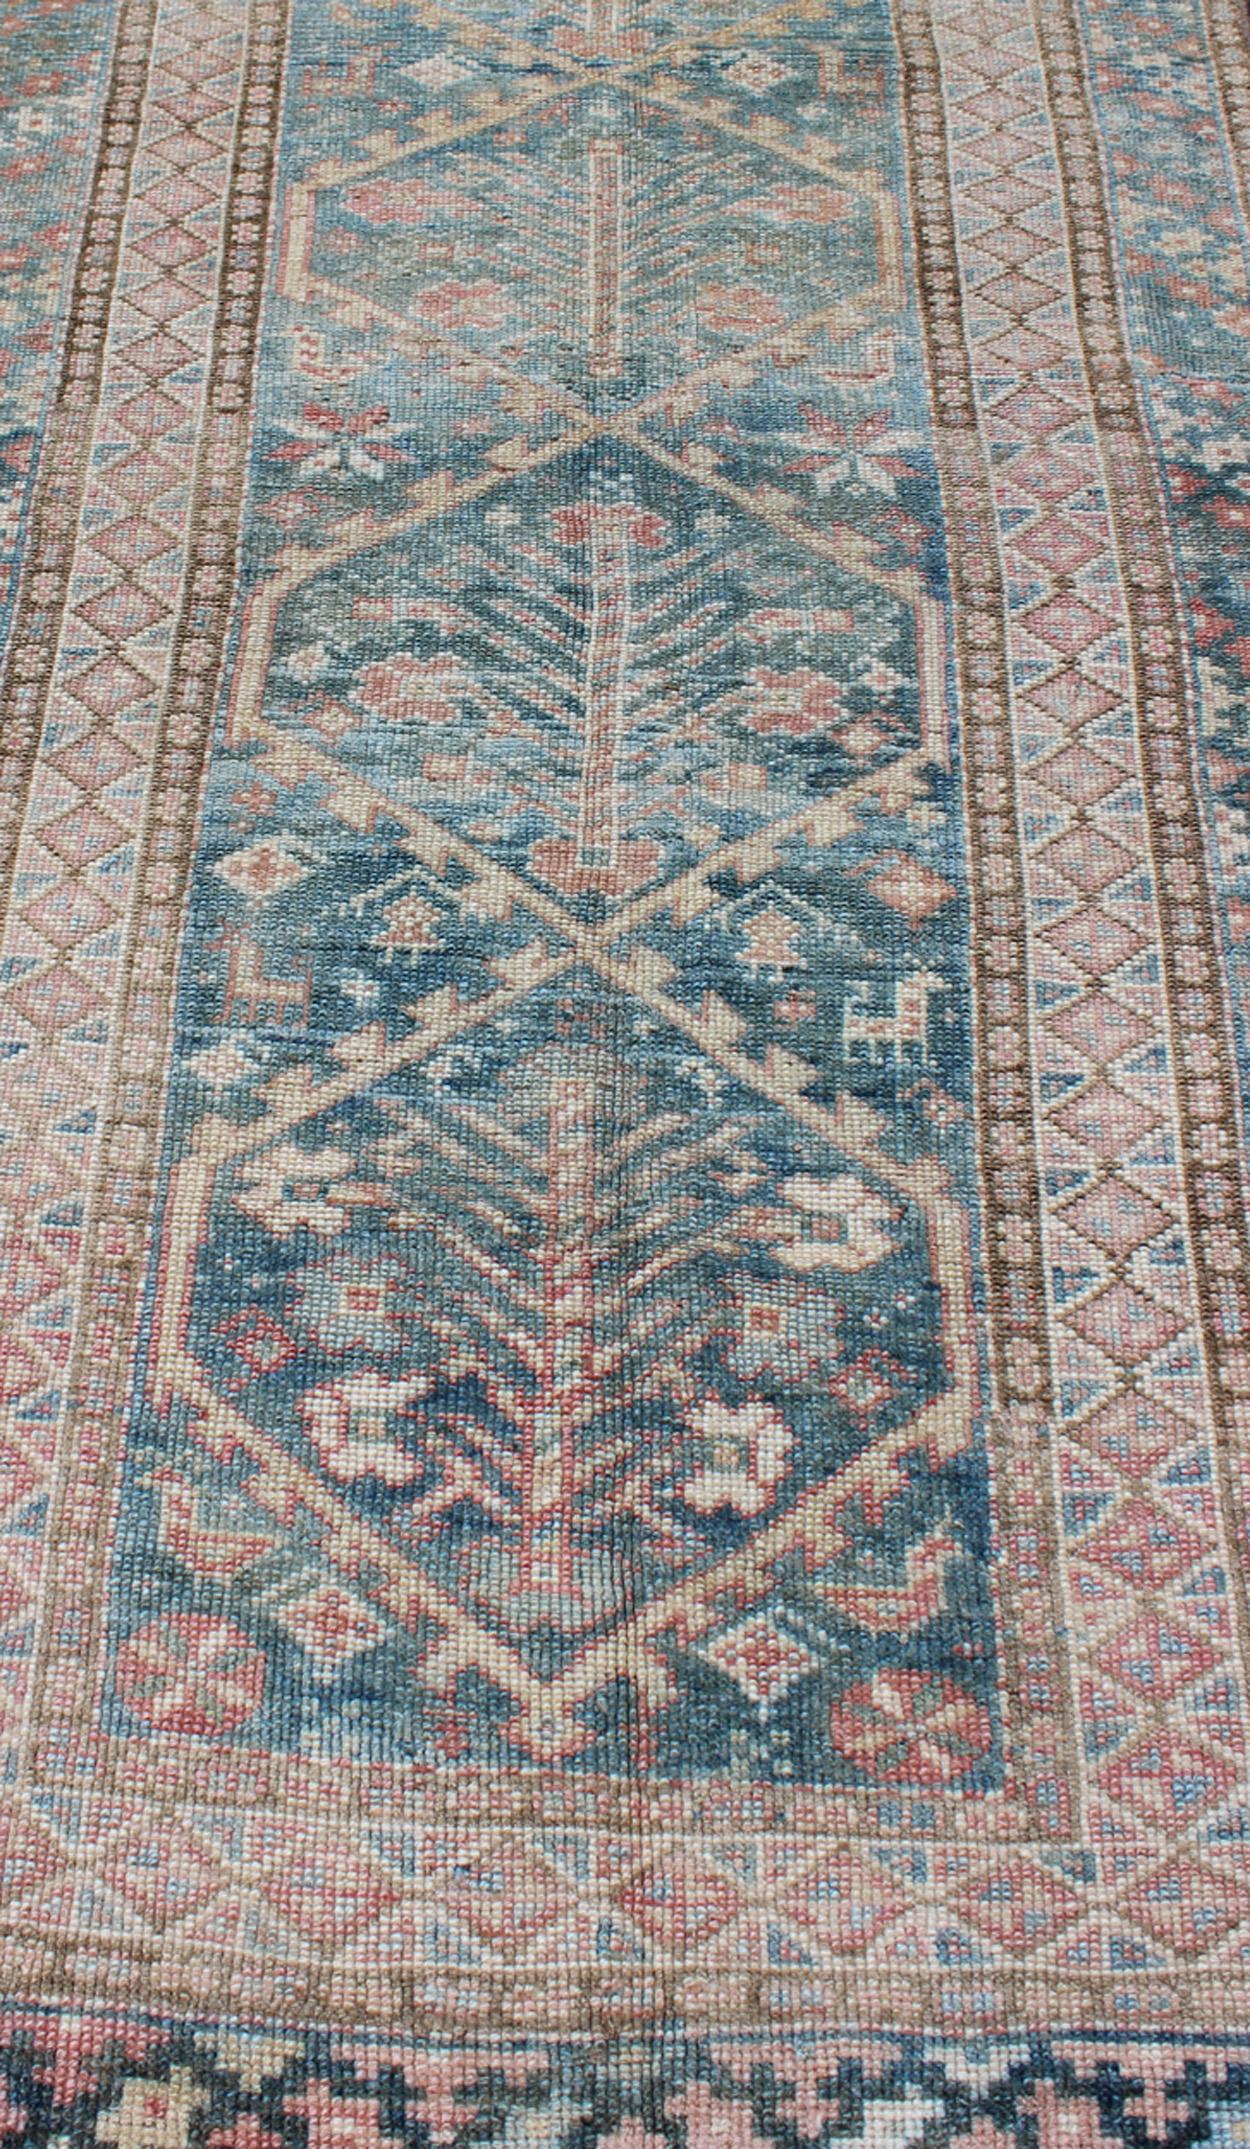 20th Century Antique Geometric Design Persian Small Lori Rug in Light Teal and Pink For Sale